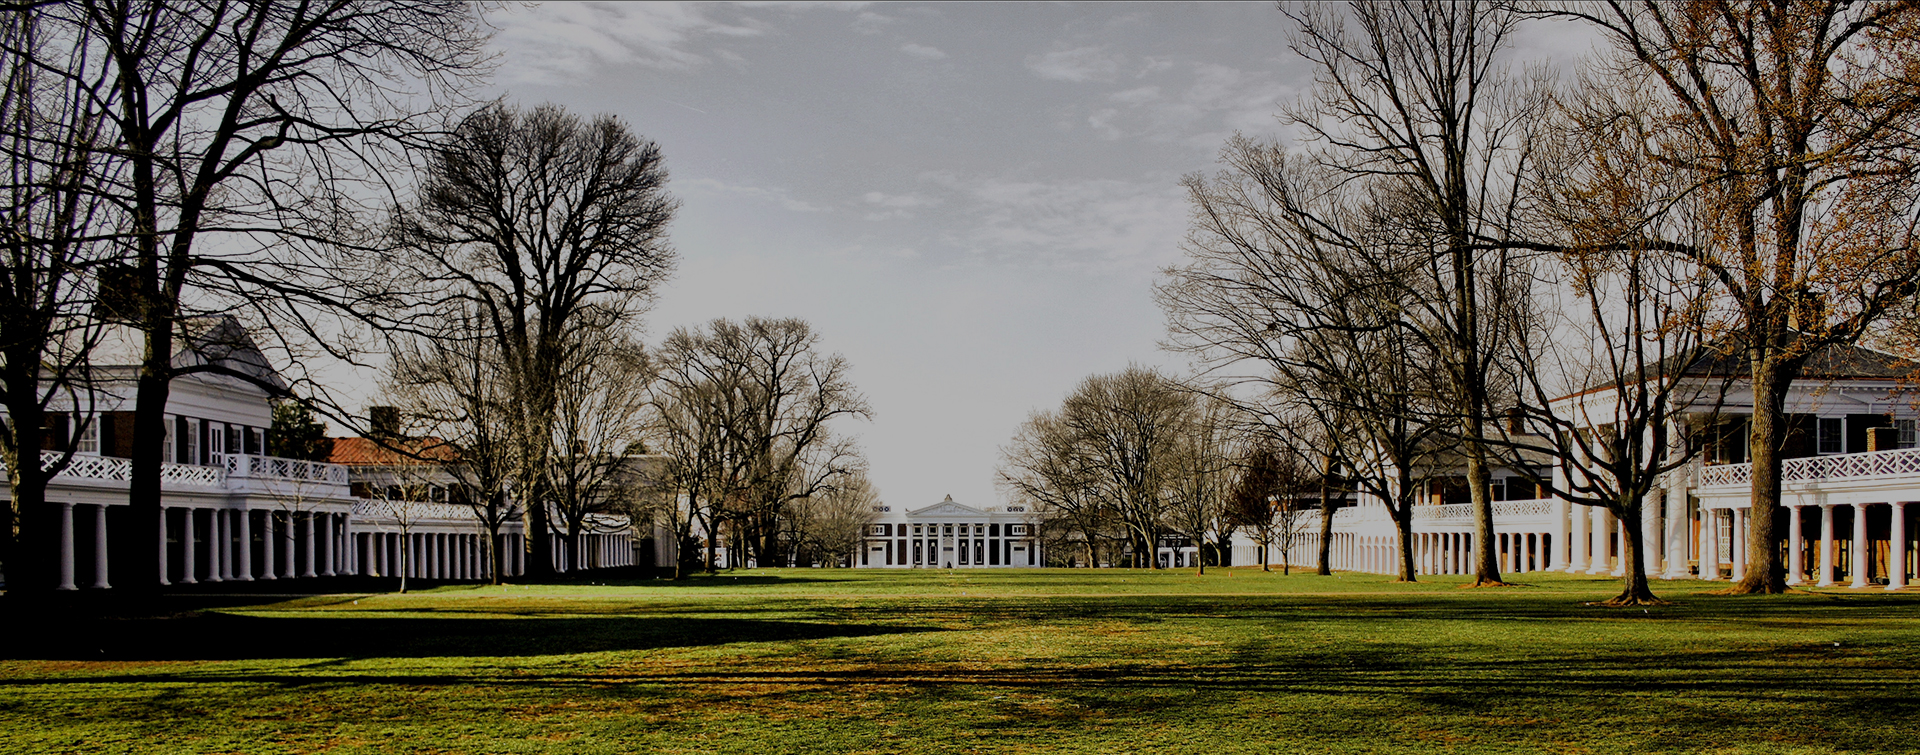 Study at the University of Virginia